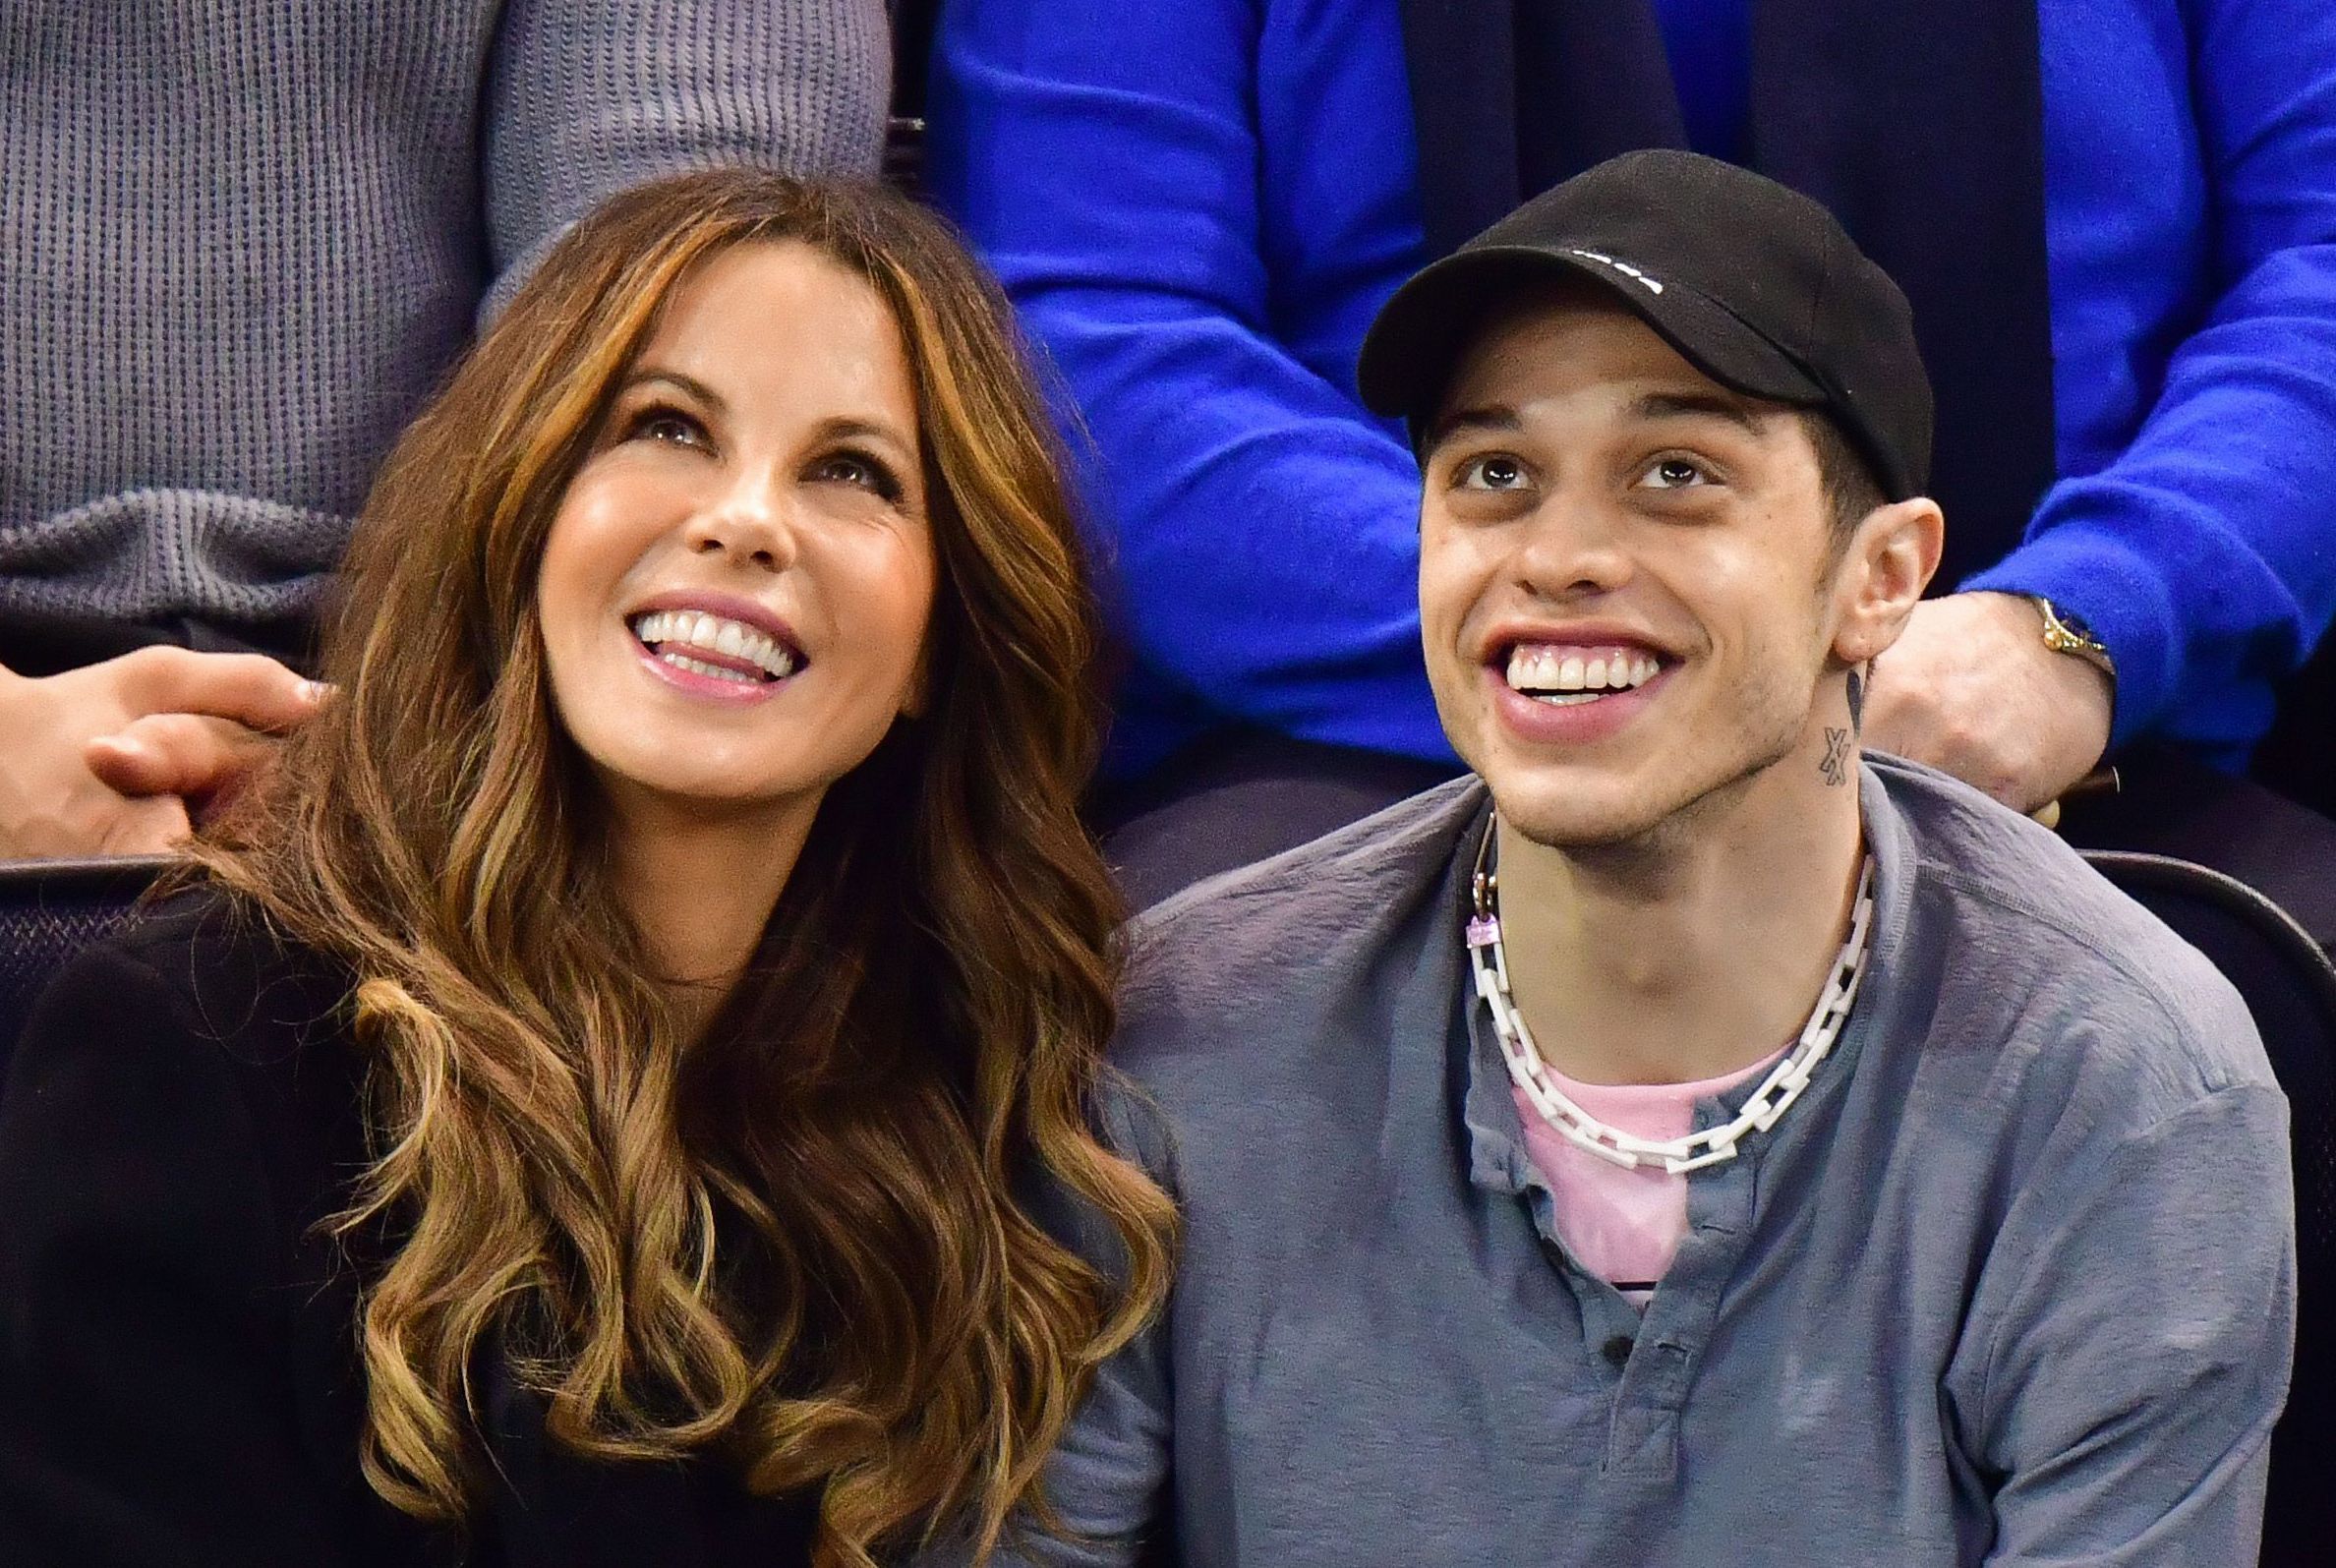 How Beckinsale Pete Davidson Feel About Their Age Difference and Relationship